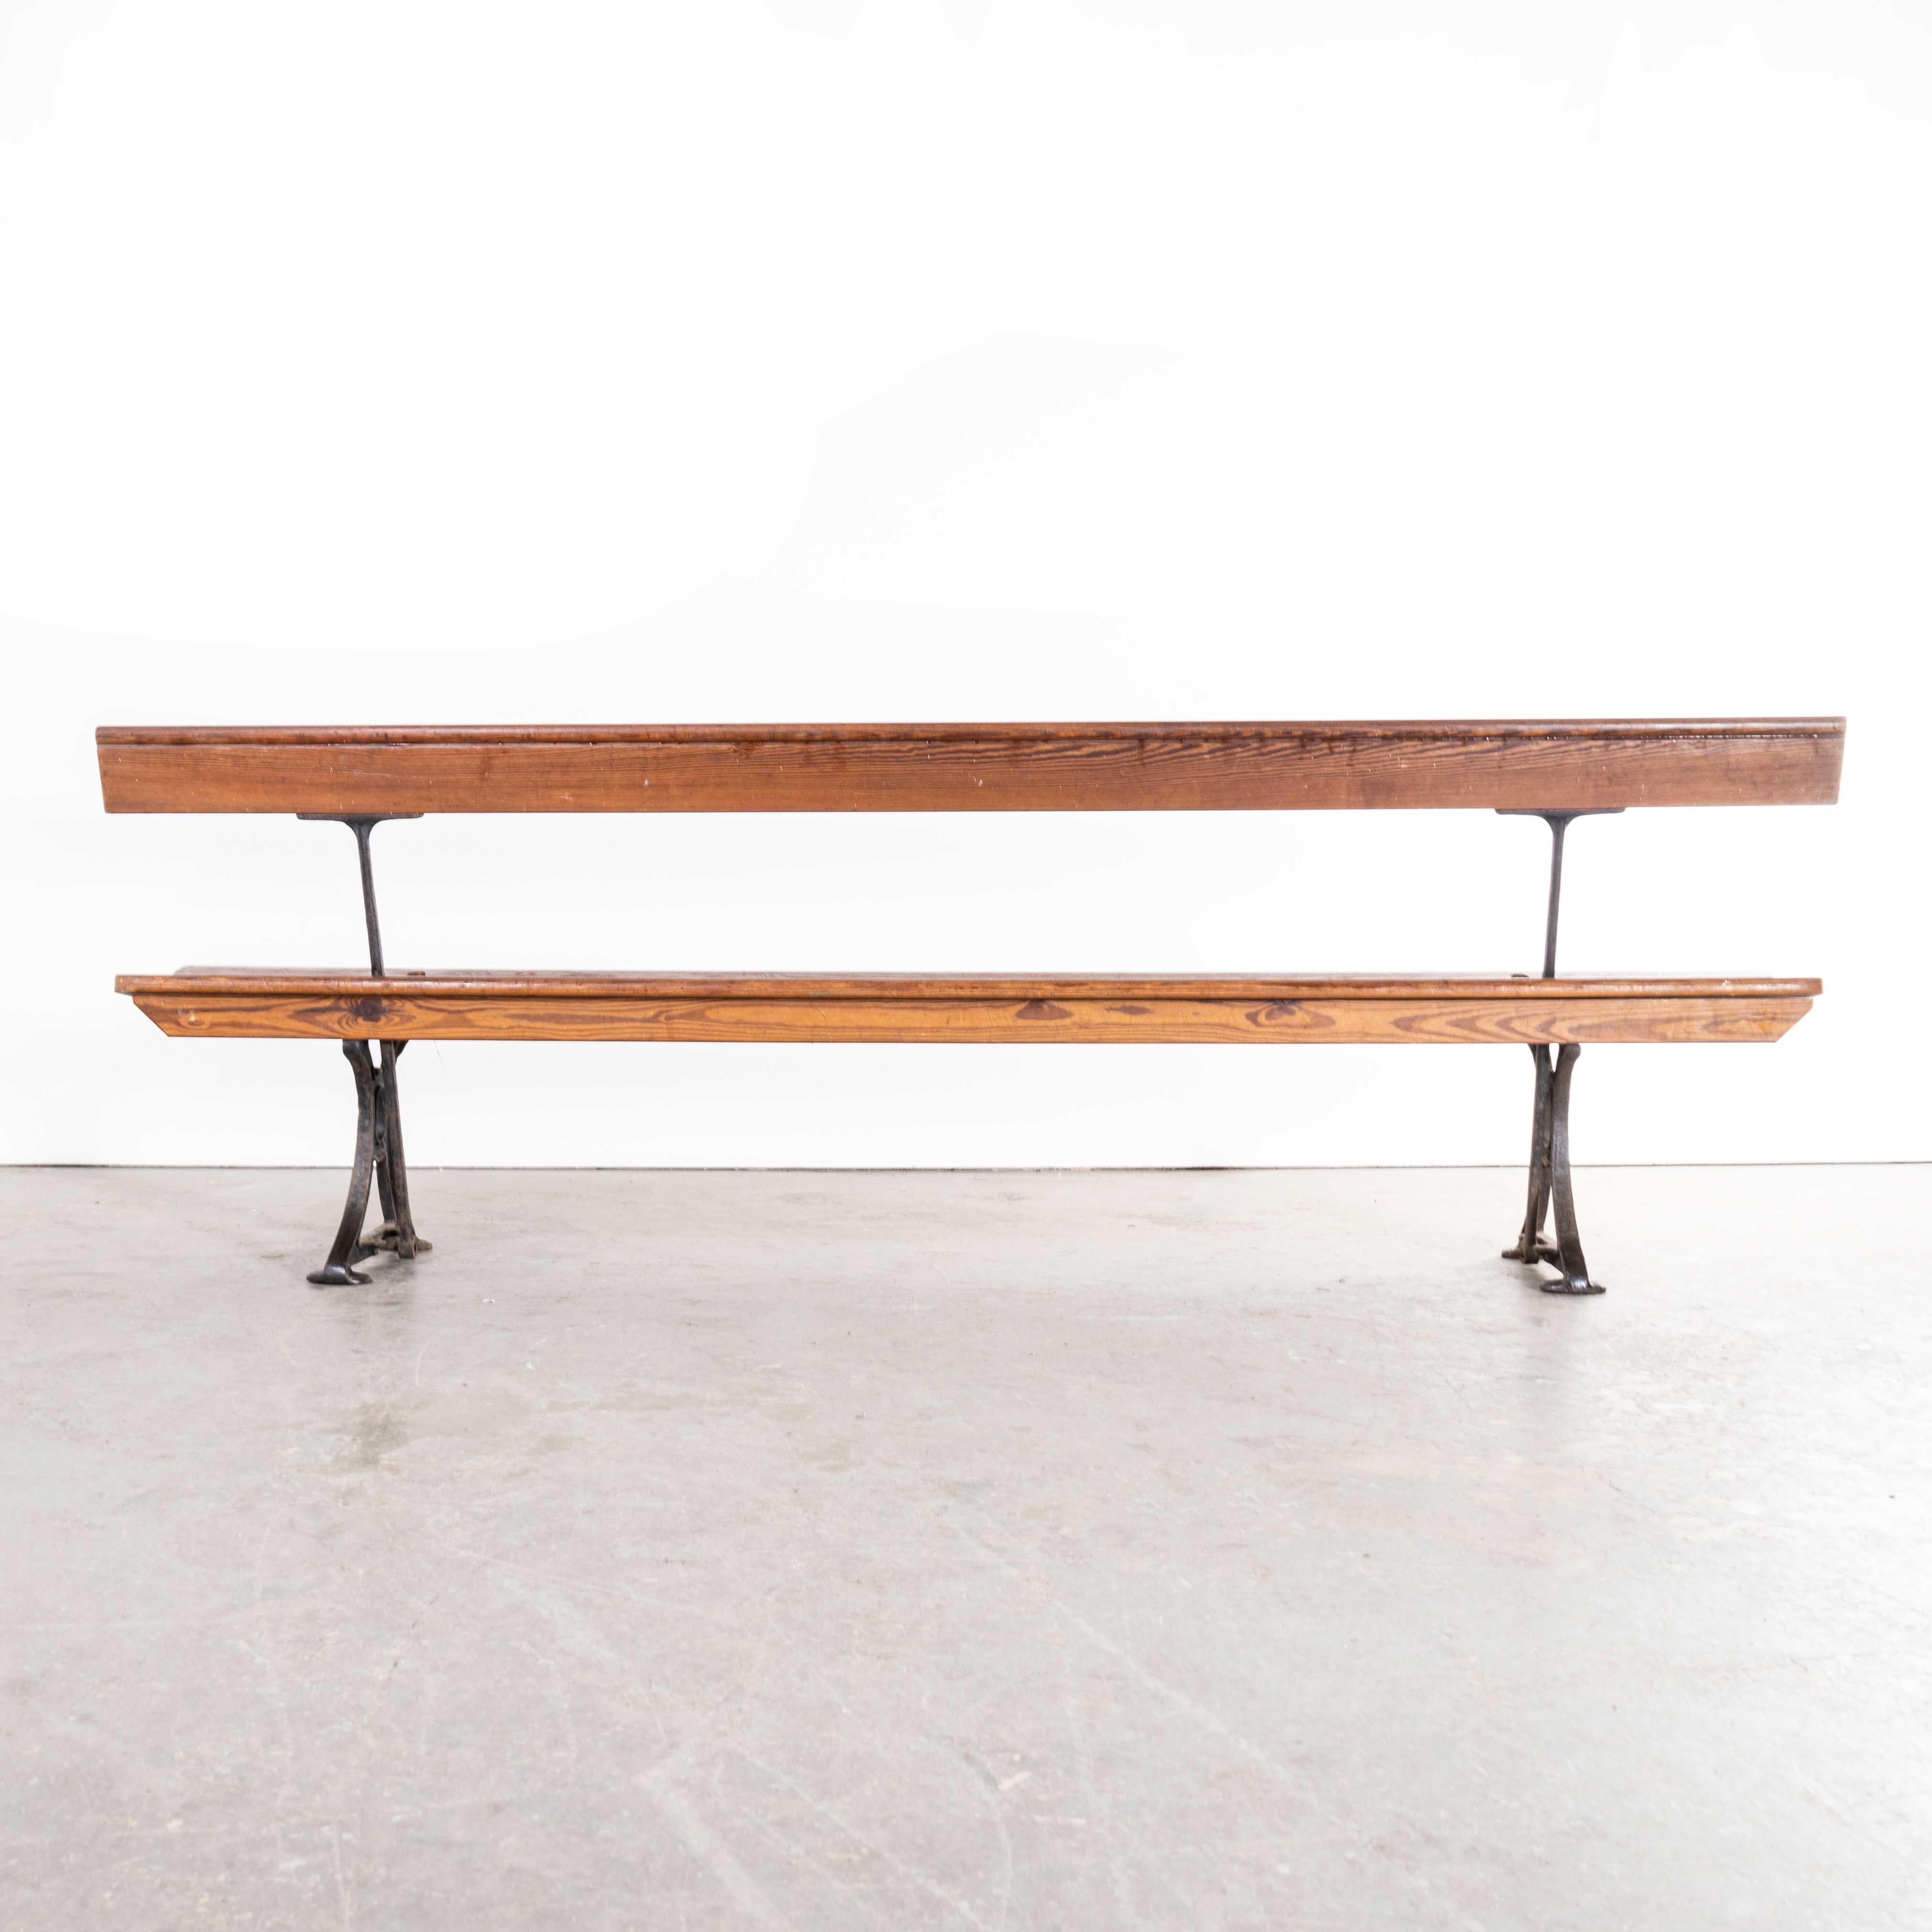 1940s Original British Station Benches – Model 2340
1940s Original British Station Benches – Model 2340. Sourced from a disused station in the midlands we have a number of these very original benches available. The benches feature heavy cast metal